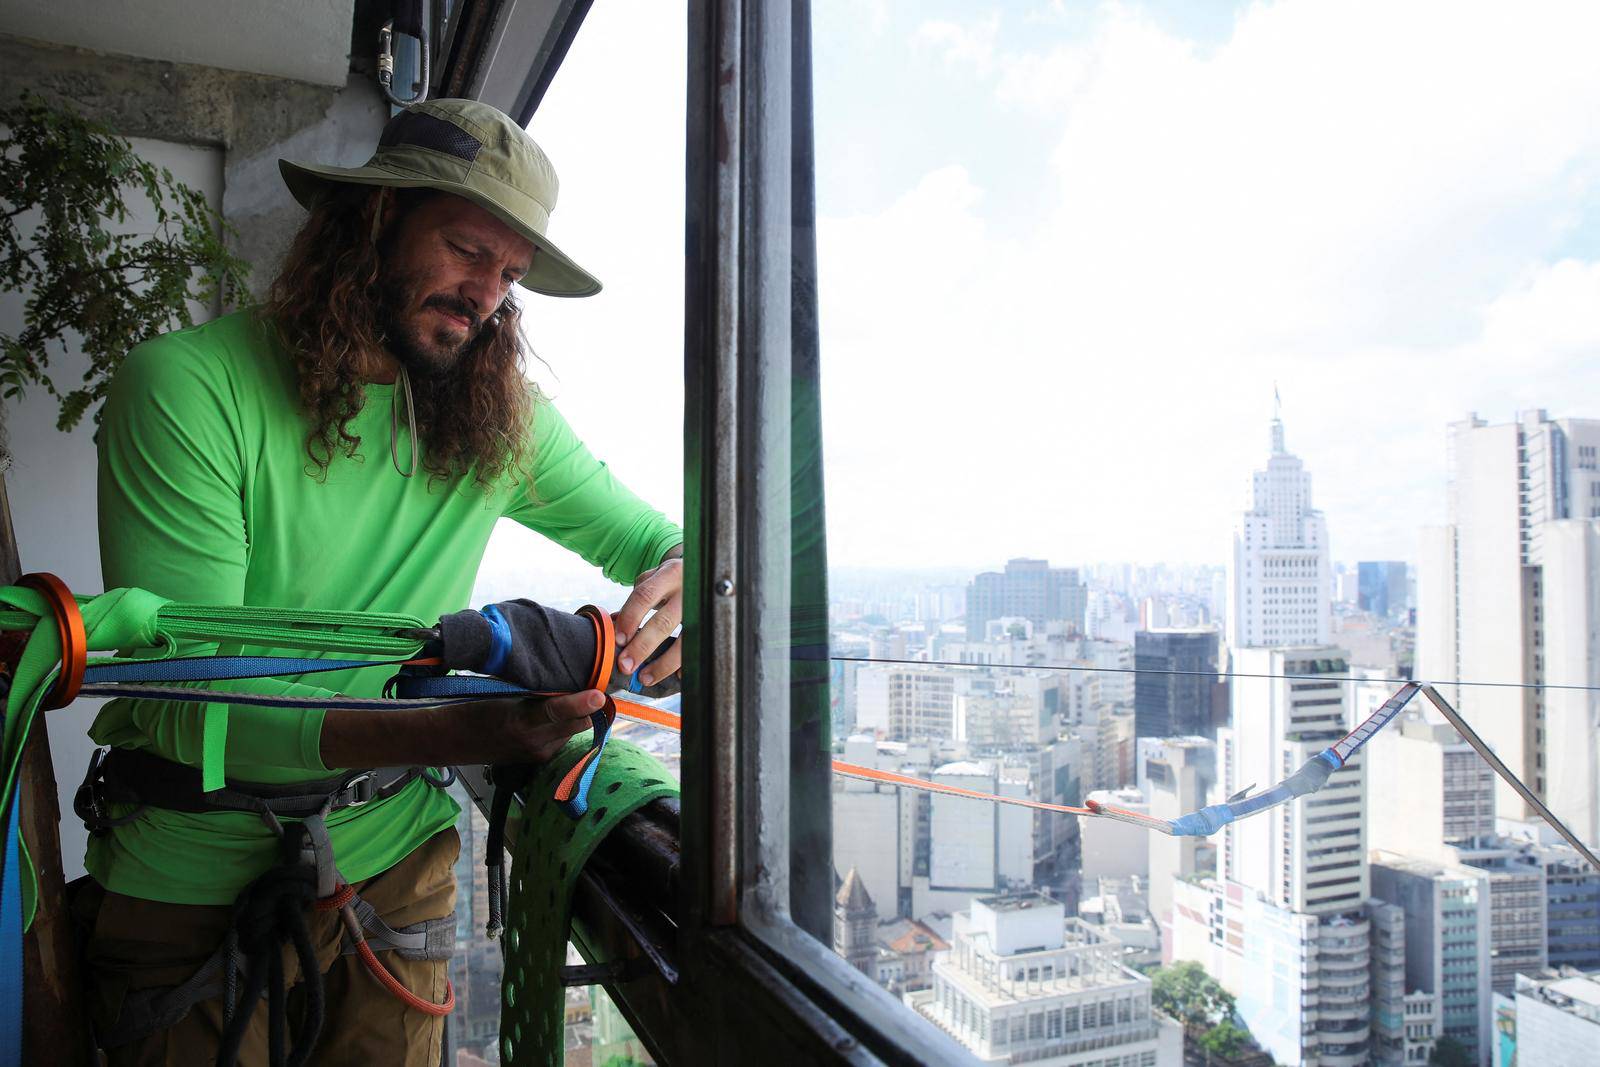 Highliners walk on the longest line of the Americas in Sao Paulo